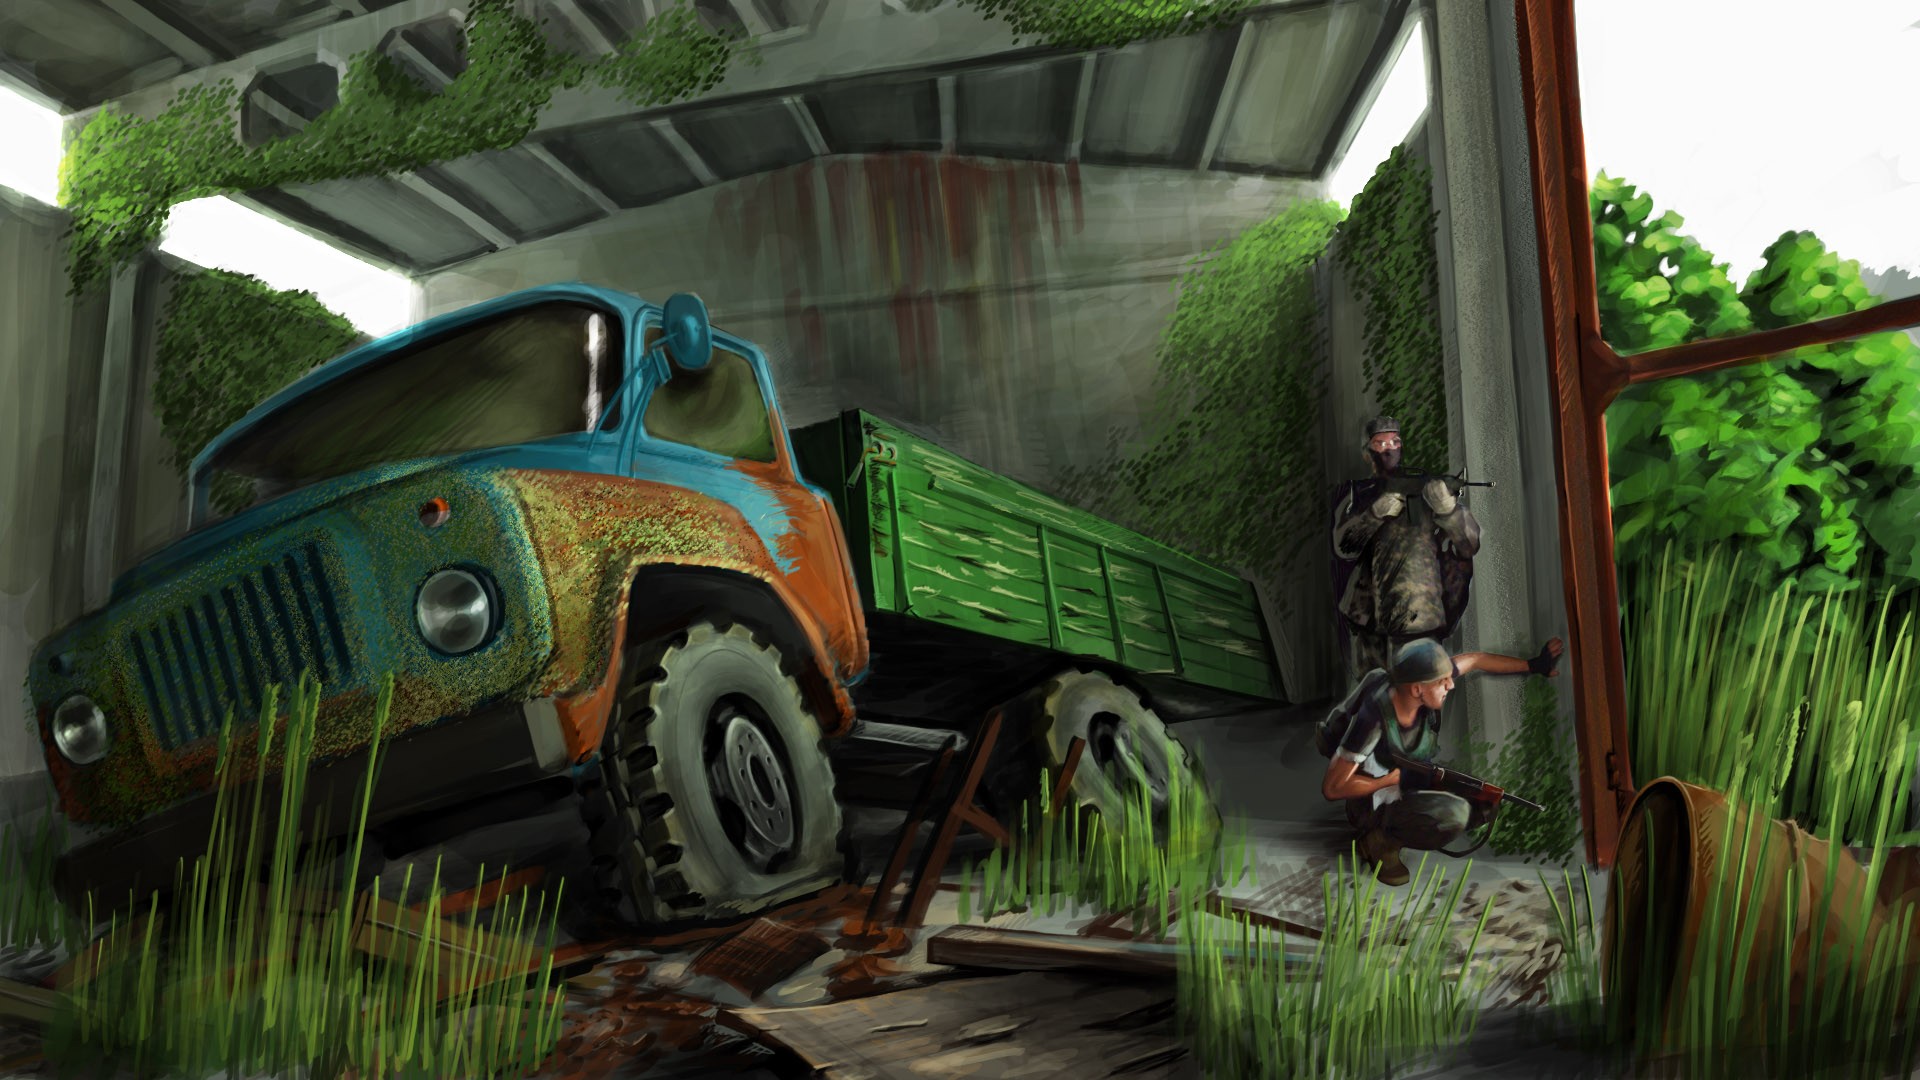 General 1920x1080 DayZ PC gaming truck video game art GAZ vehicle apocalyptic